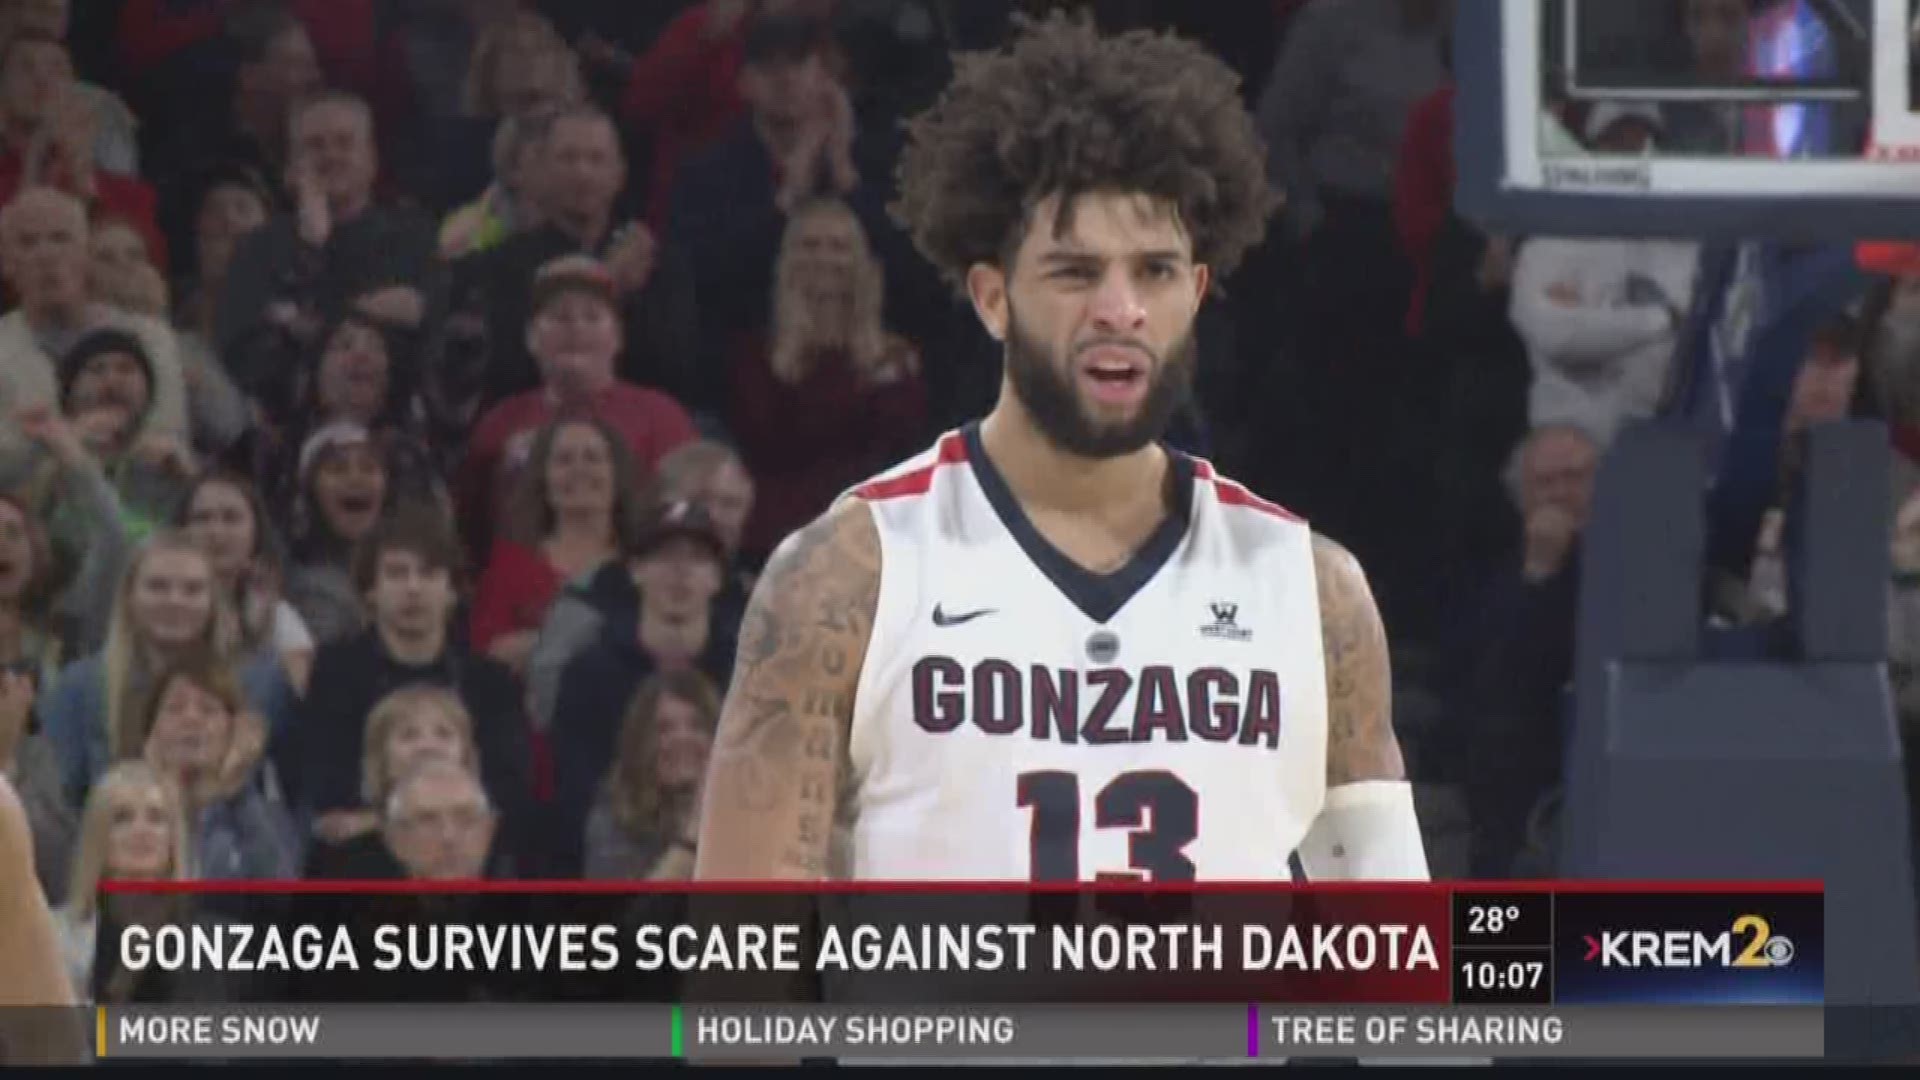 Gonzaga avoids an ugly defeat Saturday night and edges North Dakota in the Kennel 89-83 in overtime.